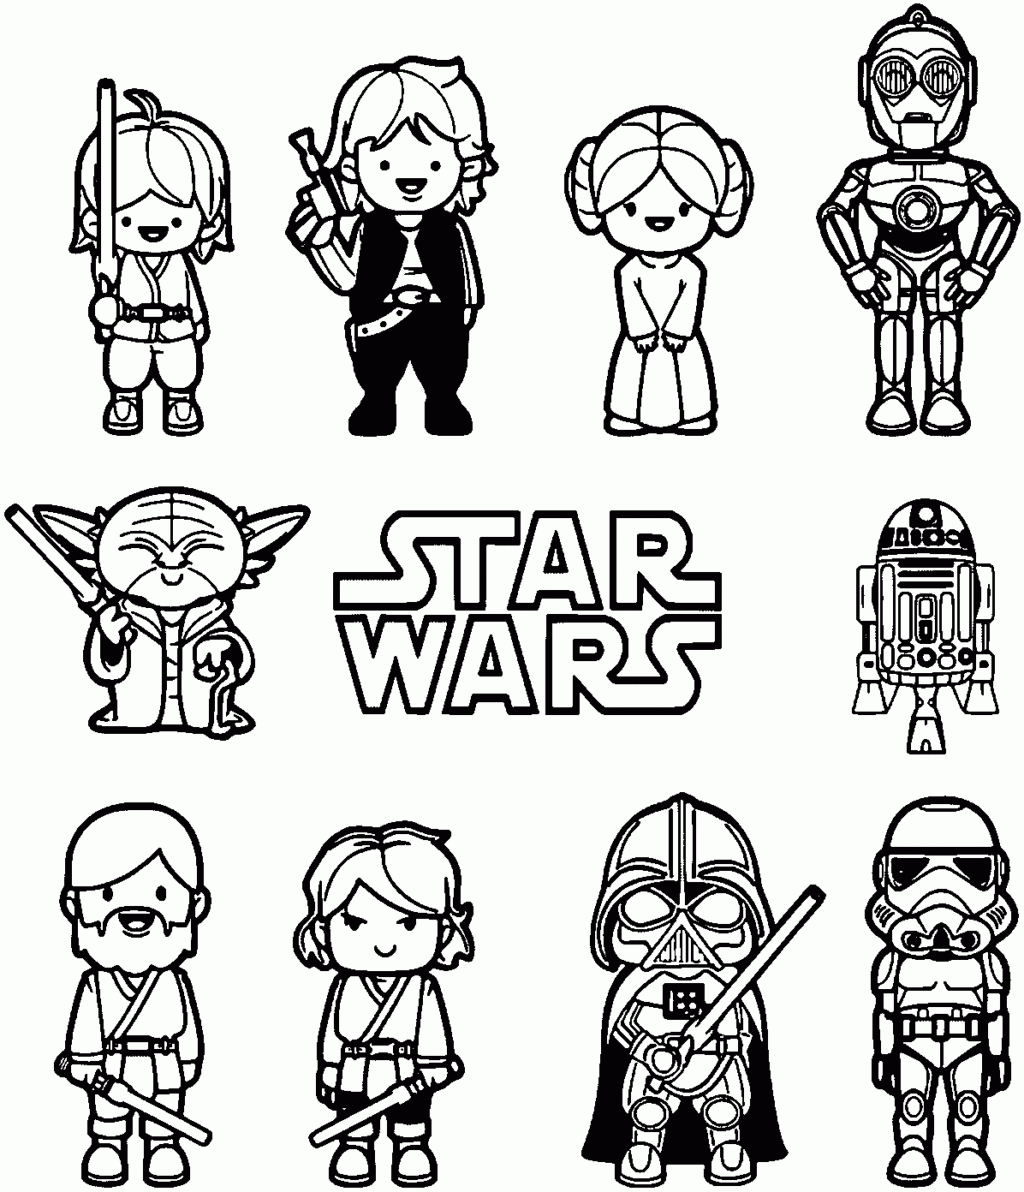 Coloring Book World ~ Free Star Wars Coloring Pages Lego Characters - Free Printable Star Wars Coloring Pages